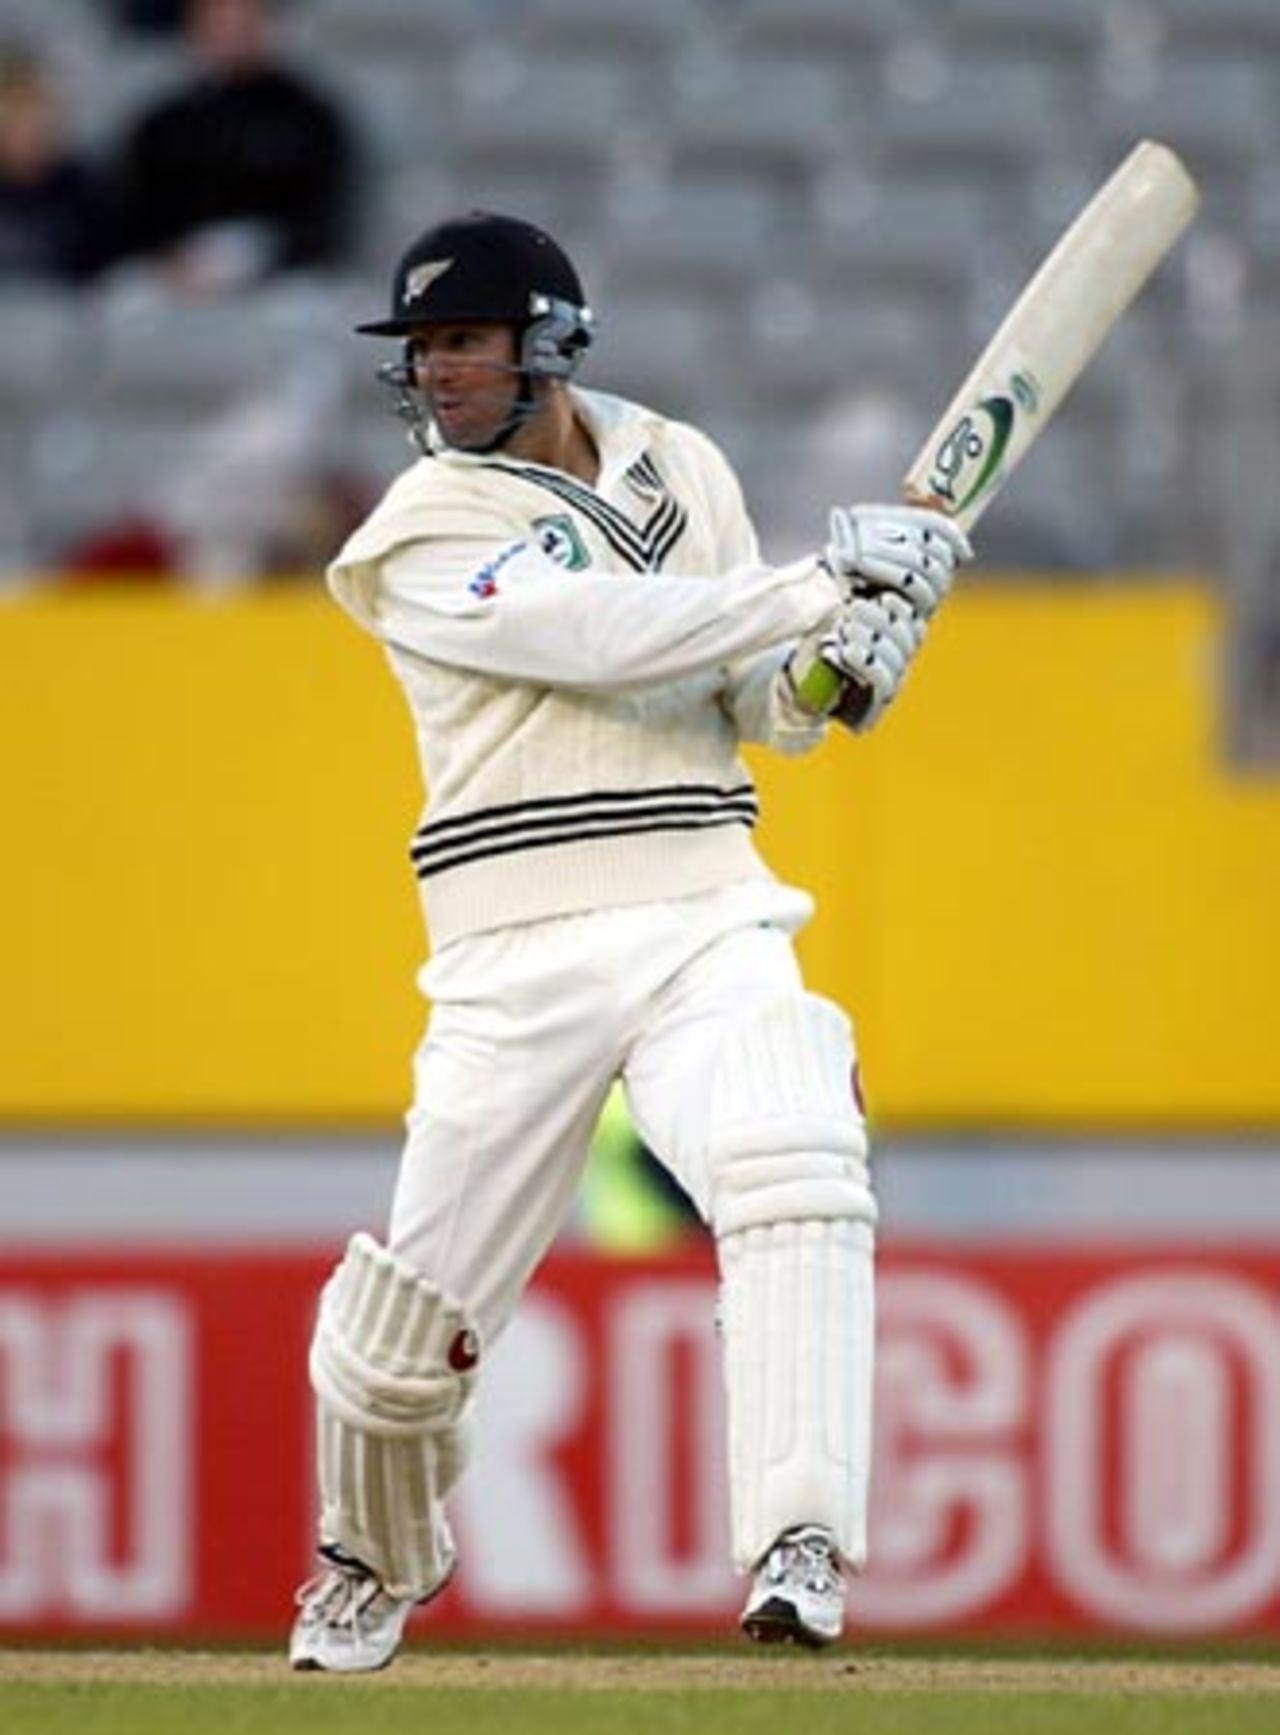 New Zealand batsman Nathan Astle cuts a delivery during his second innings of 65. 3rd Test: New Zealand v England at Eden Park, Auckland, 30 March-3 April 2002 (2 April 2002).